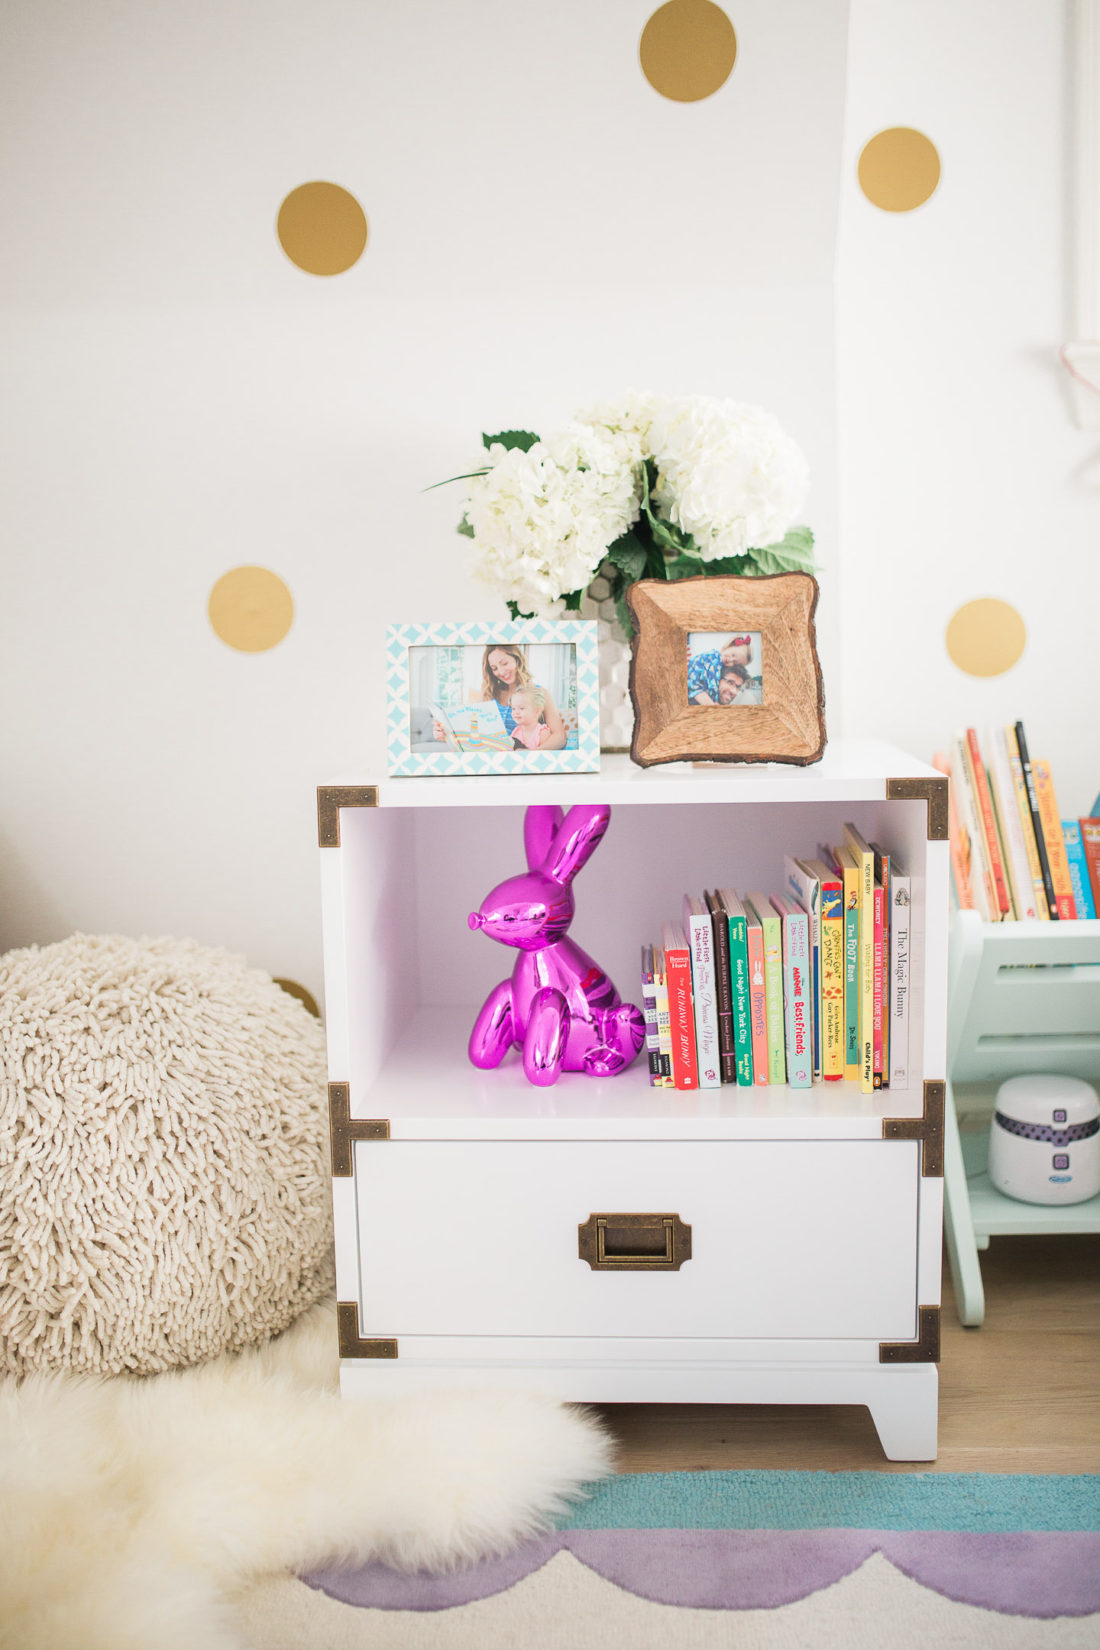 Marlowe Martino's bedroom, as designed by her mother Eva Amurri Martino of lifestyle and motherhood blog Happily Eva After